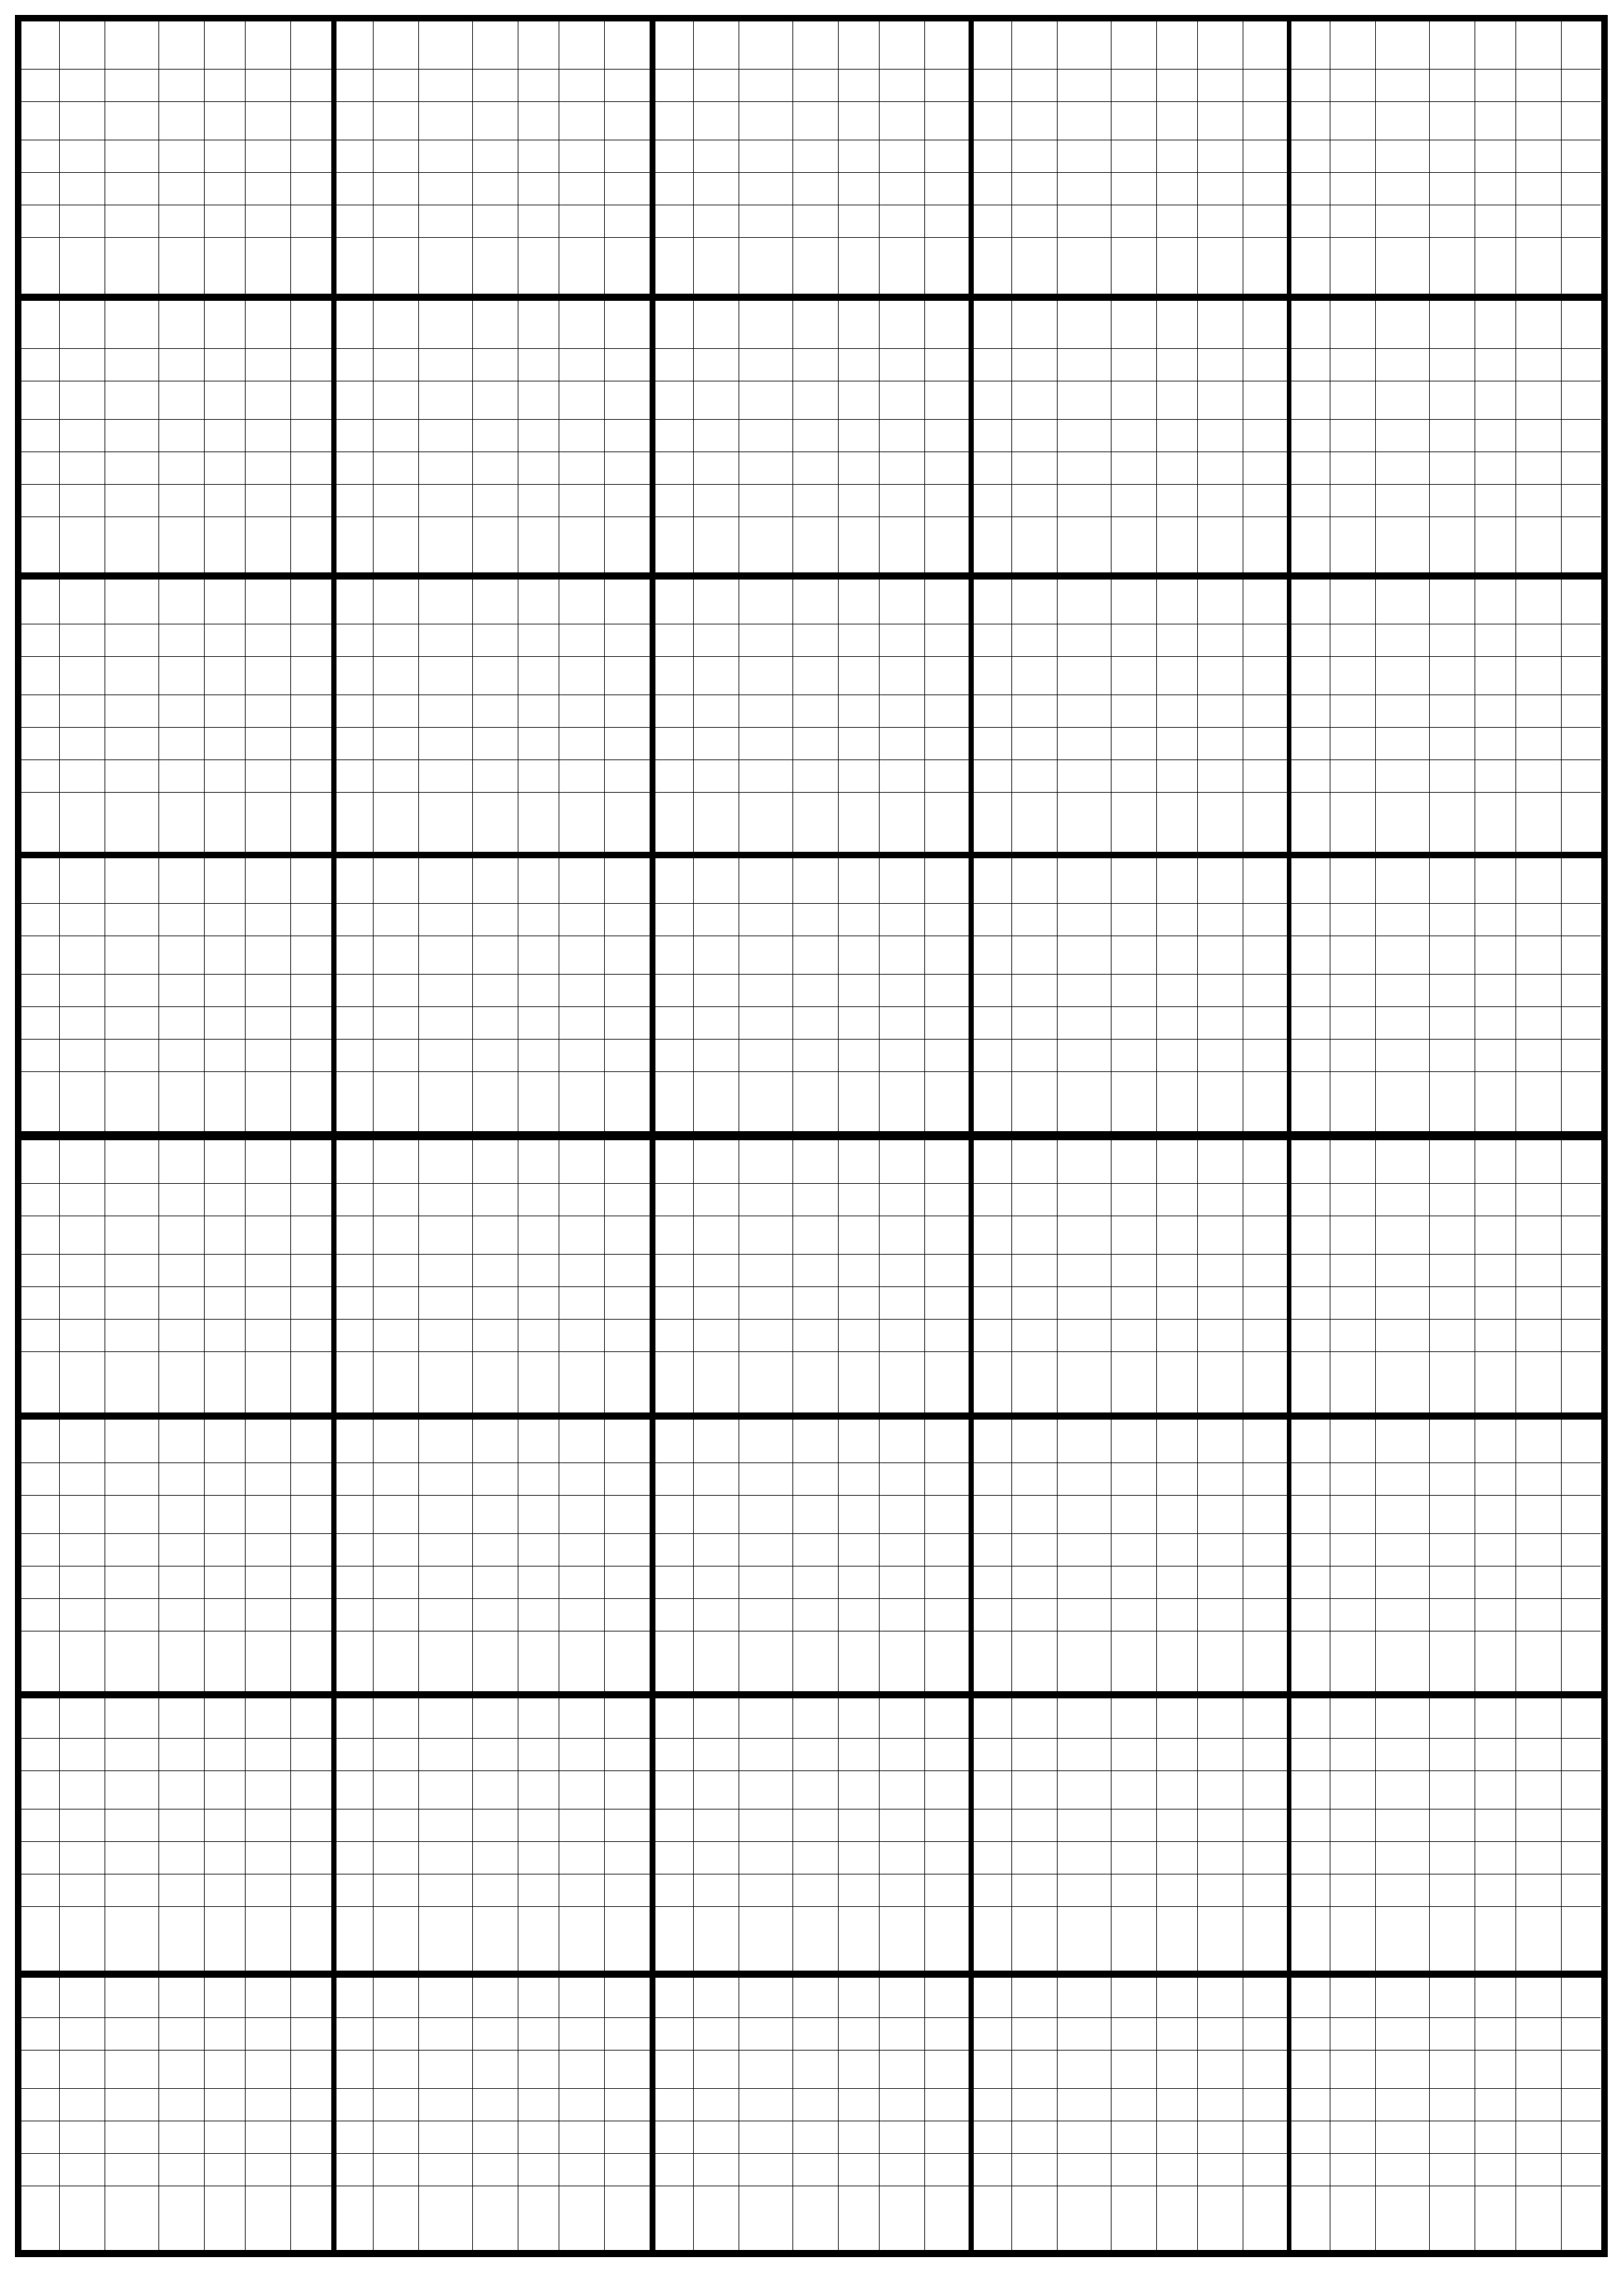 5 Printable Centimeter Graph Paper Templates HowToWiki